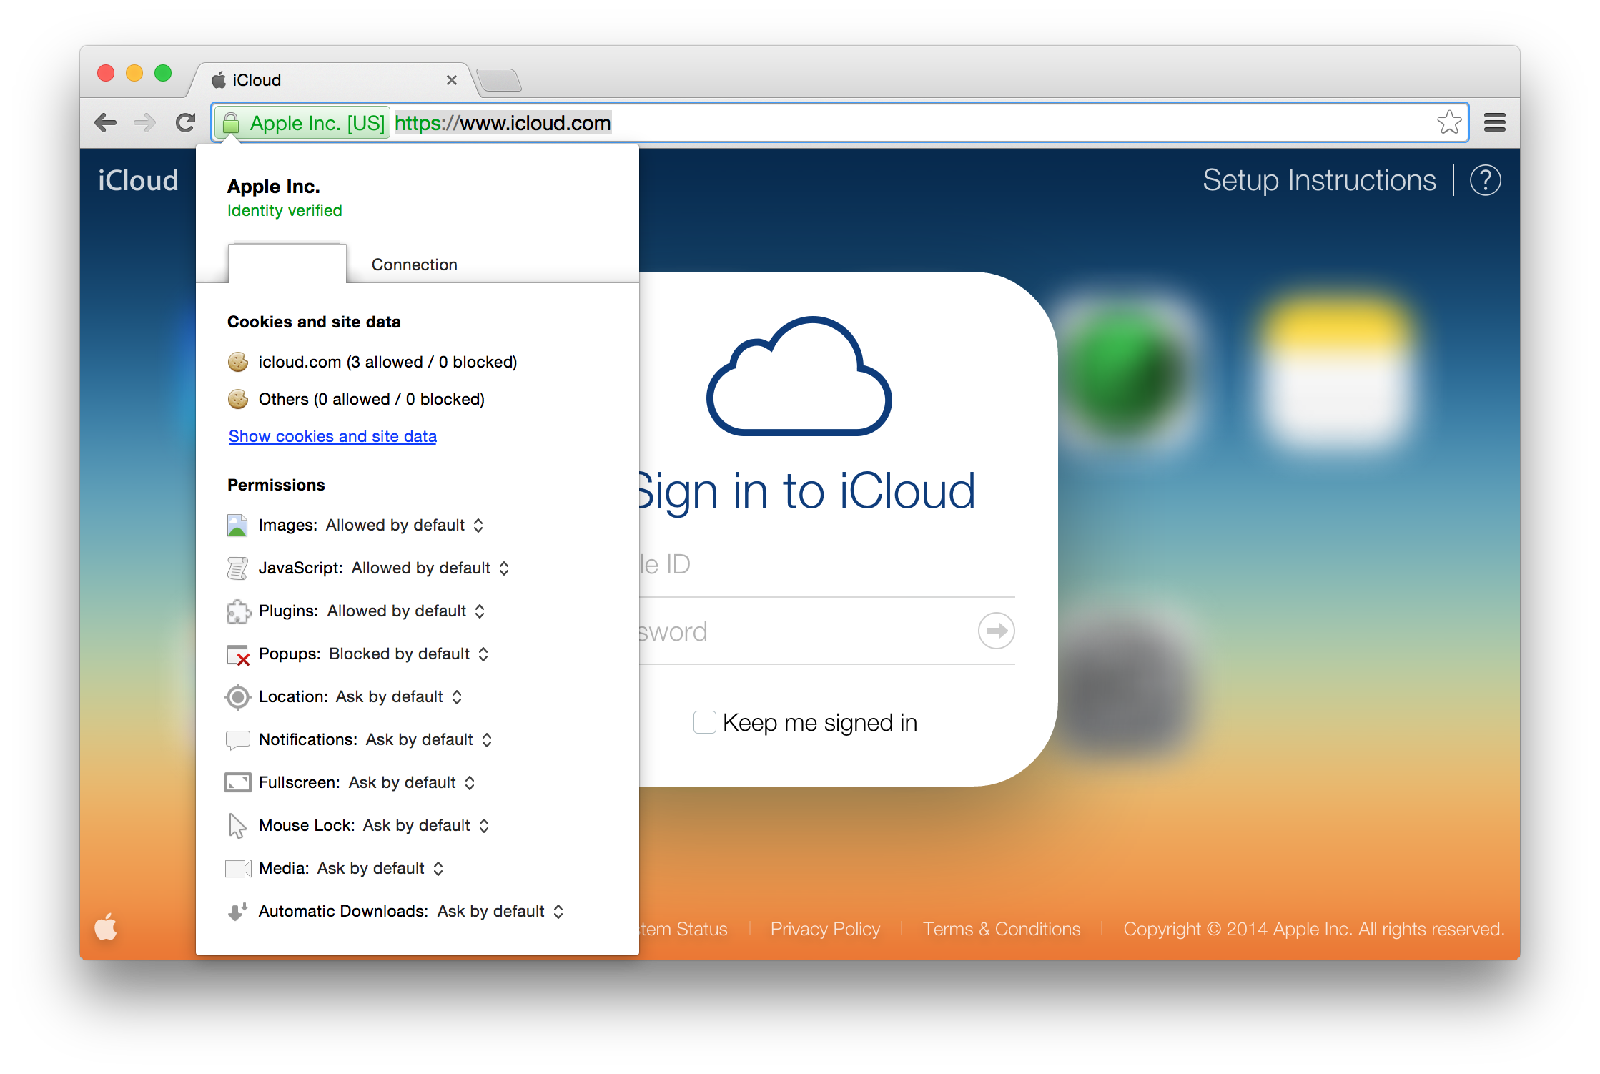 How To Make Sure You’re Visiting The Real iCloud Page